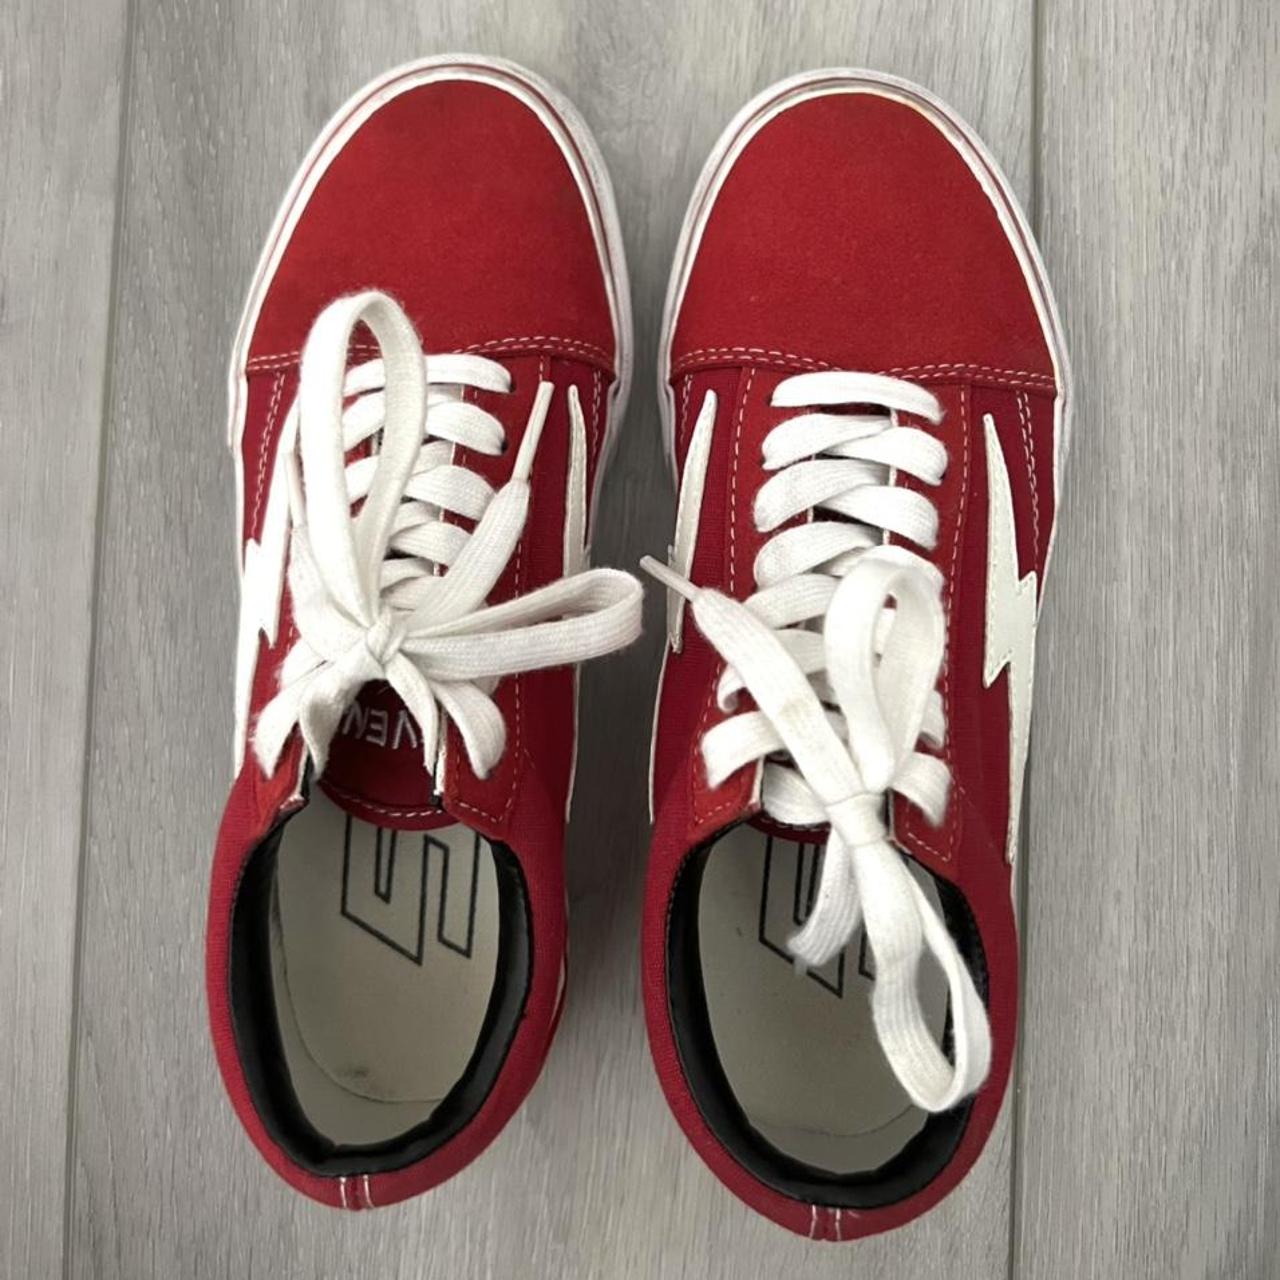 revenge x storm classic red suede... -